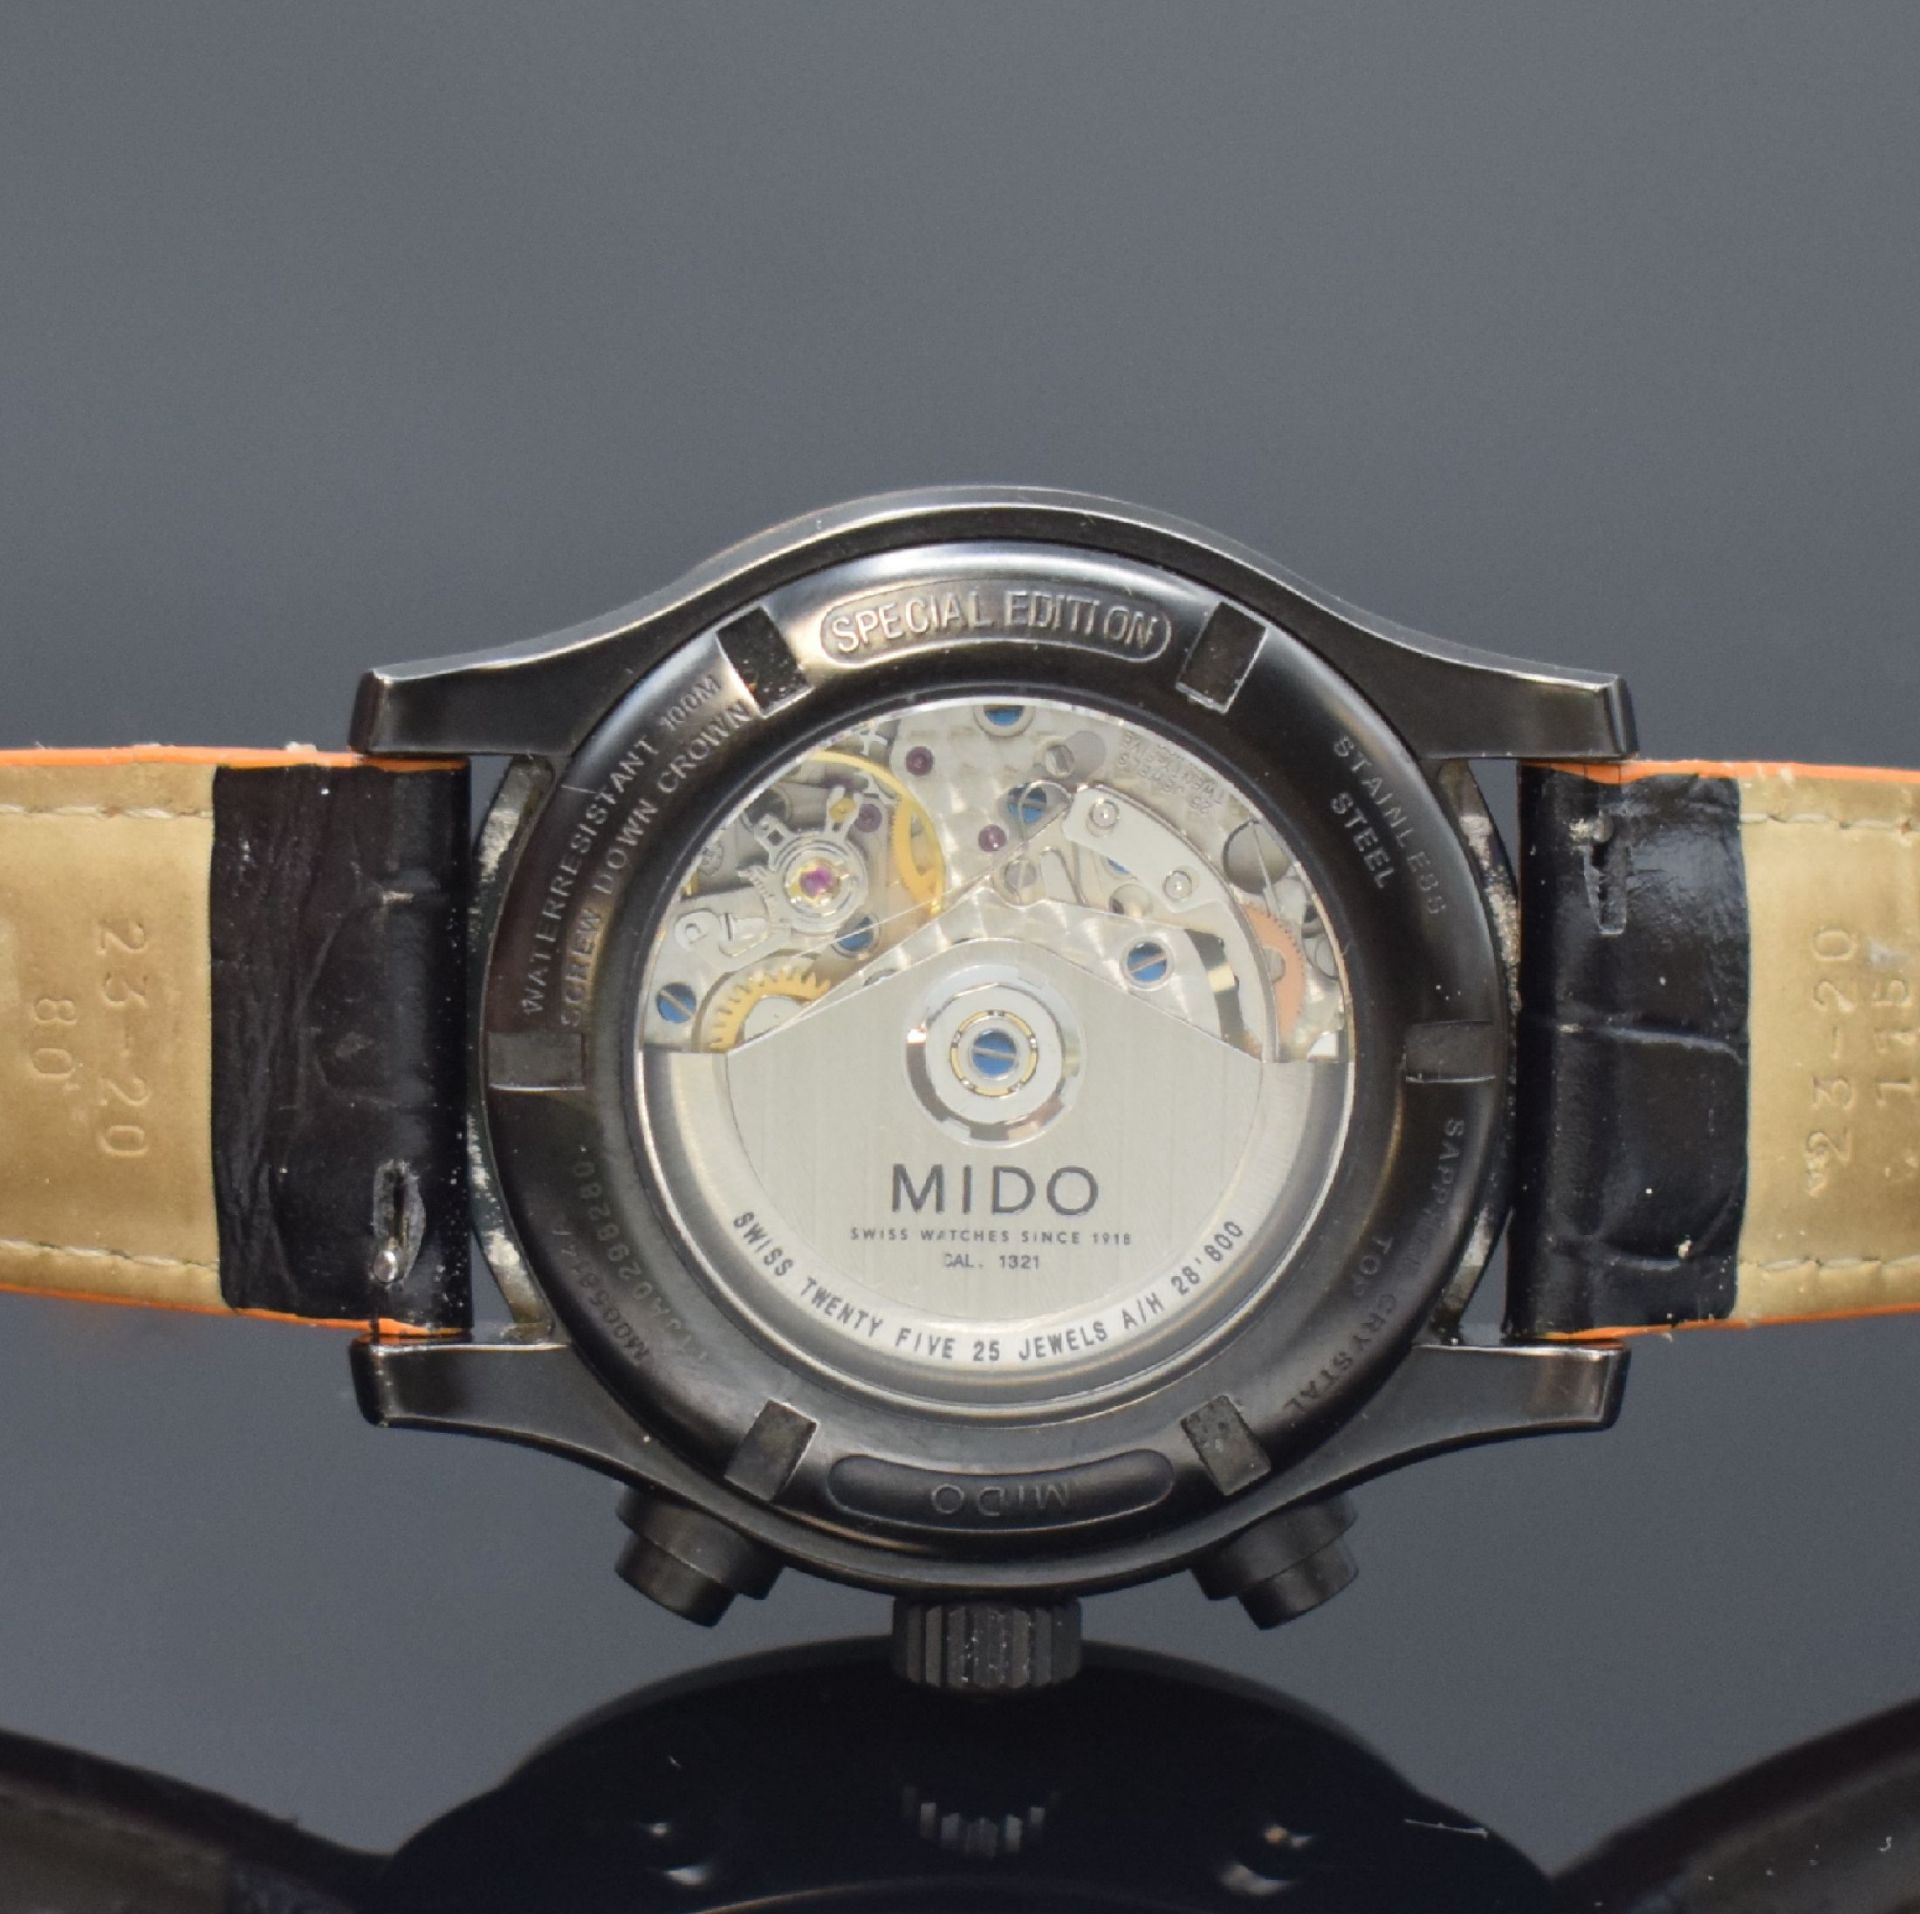 MIDO Armbandchronograph Multifort Special Edition Referenz - Image 6 of 6